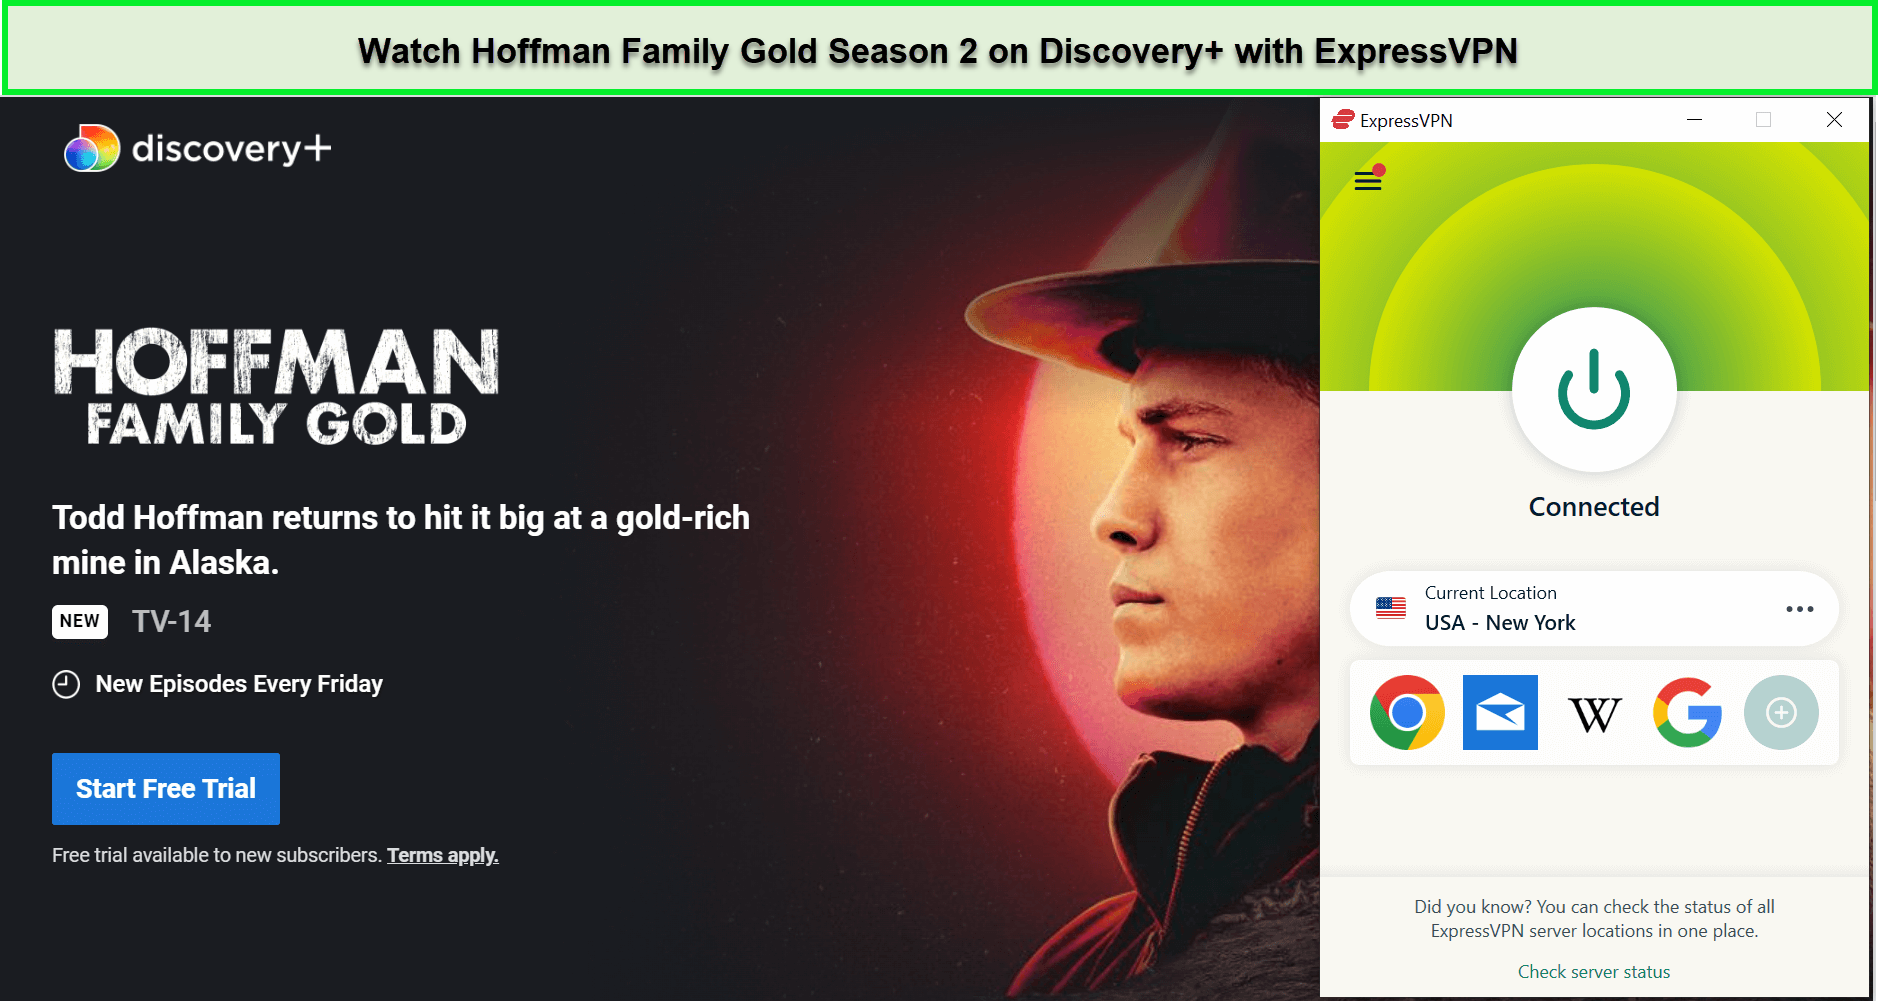 Watch-Hoffman-Family-Gold-Season-2-in-kr-on-Discovery-with-ExpressVPN.